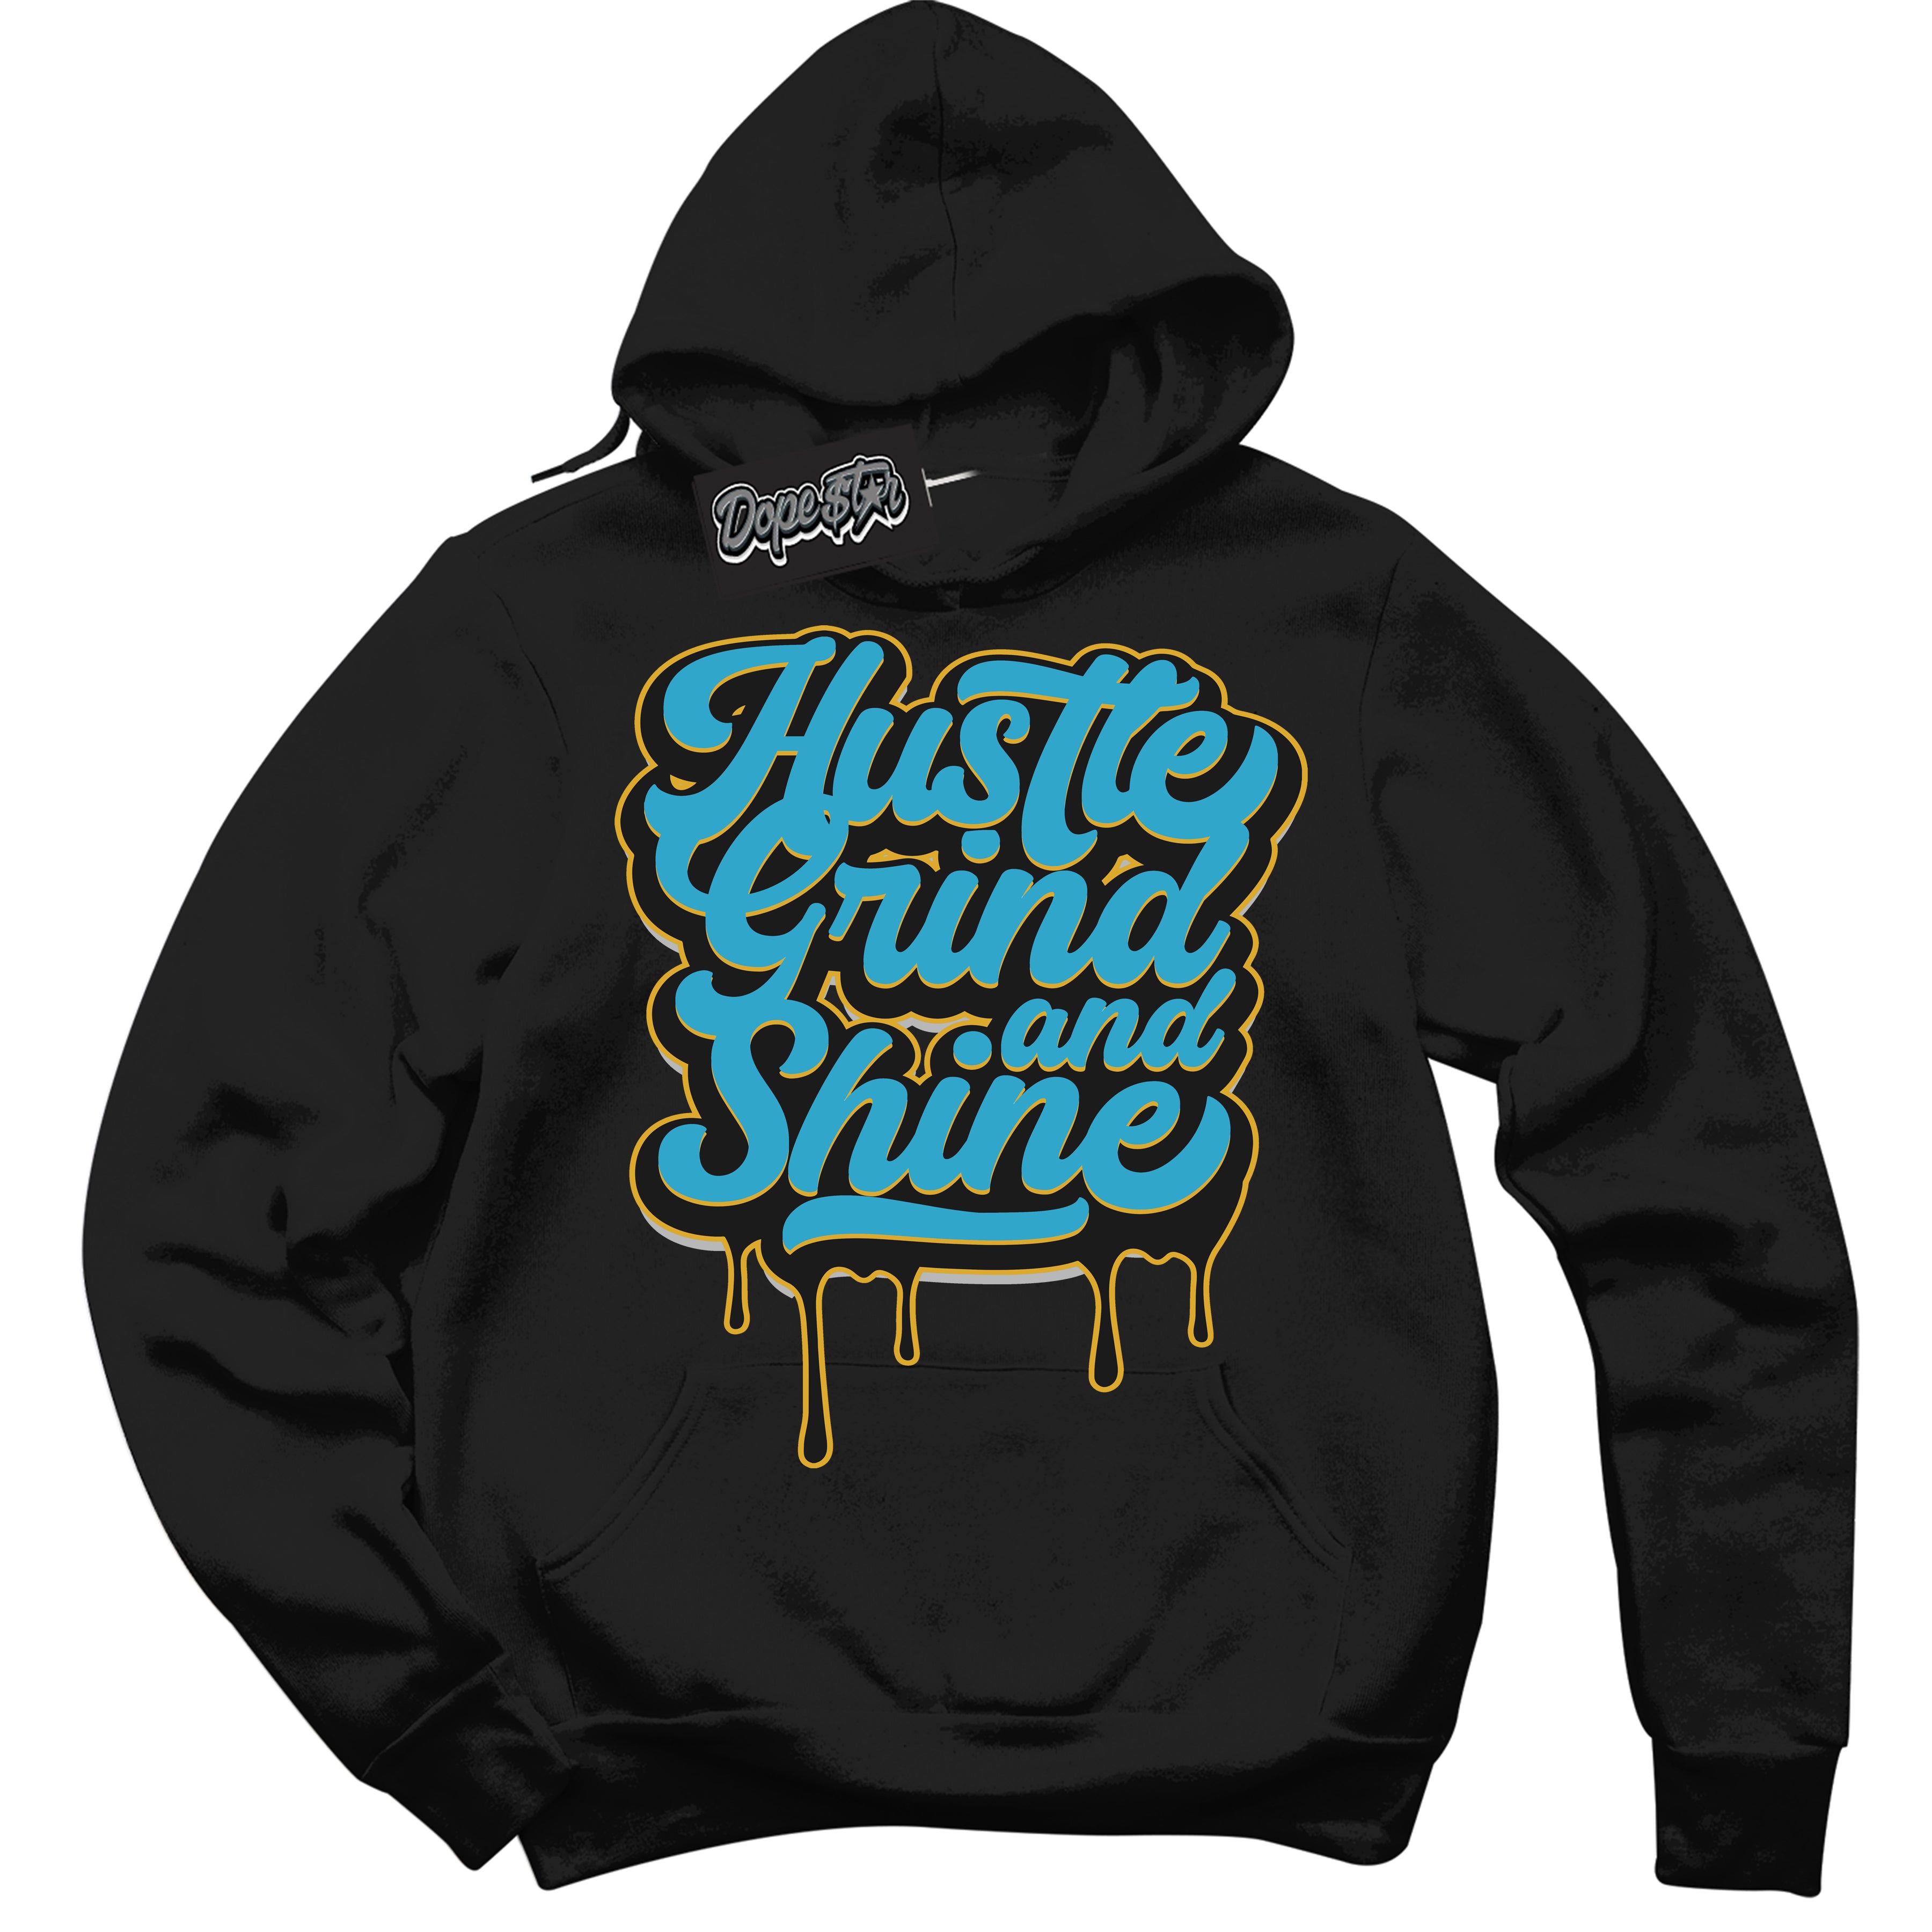 Cool Black Hoodie with “ Hustle Grind And Shine ”  design that Perfectly Matches Aqua 5s Sneakers.